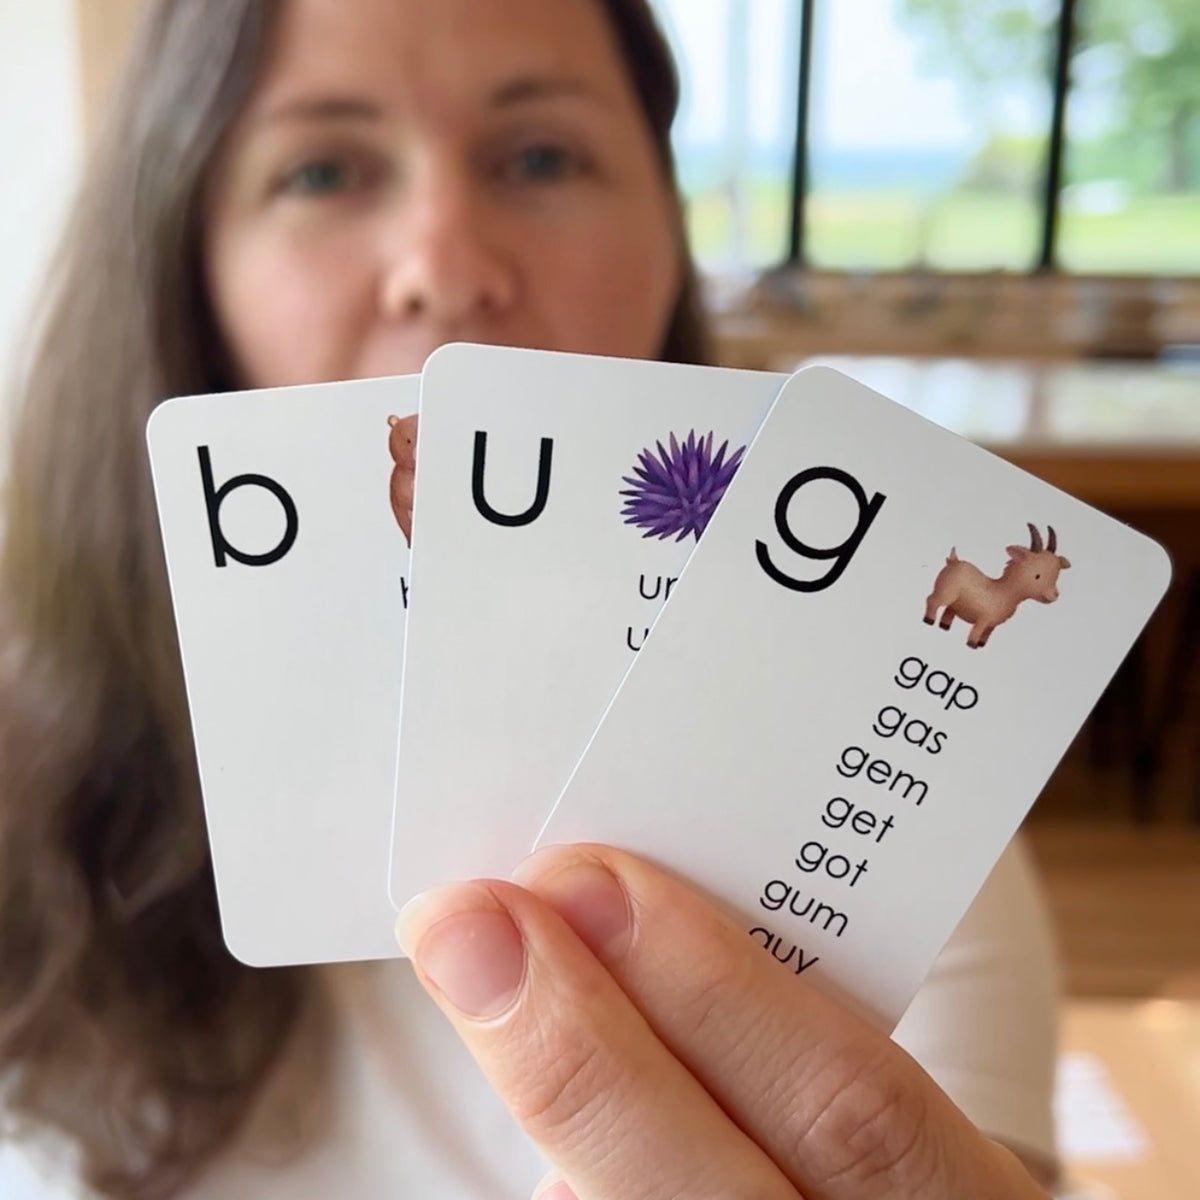 The Spelling Card Game